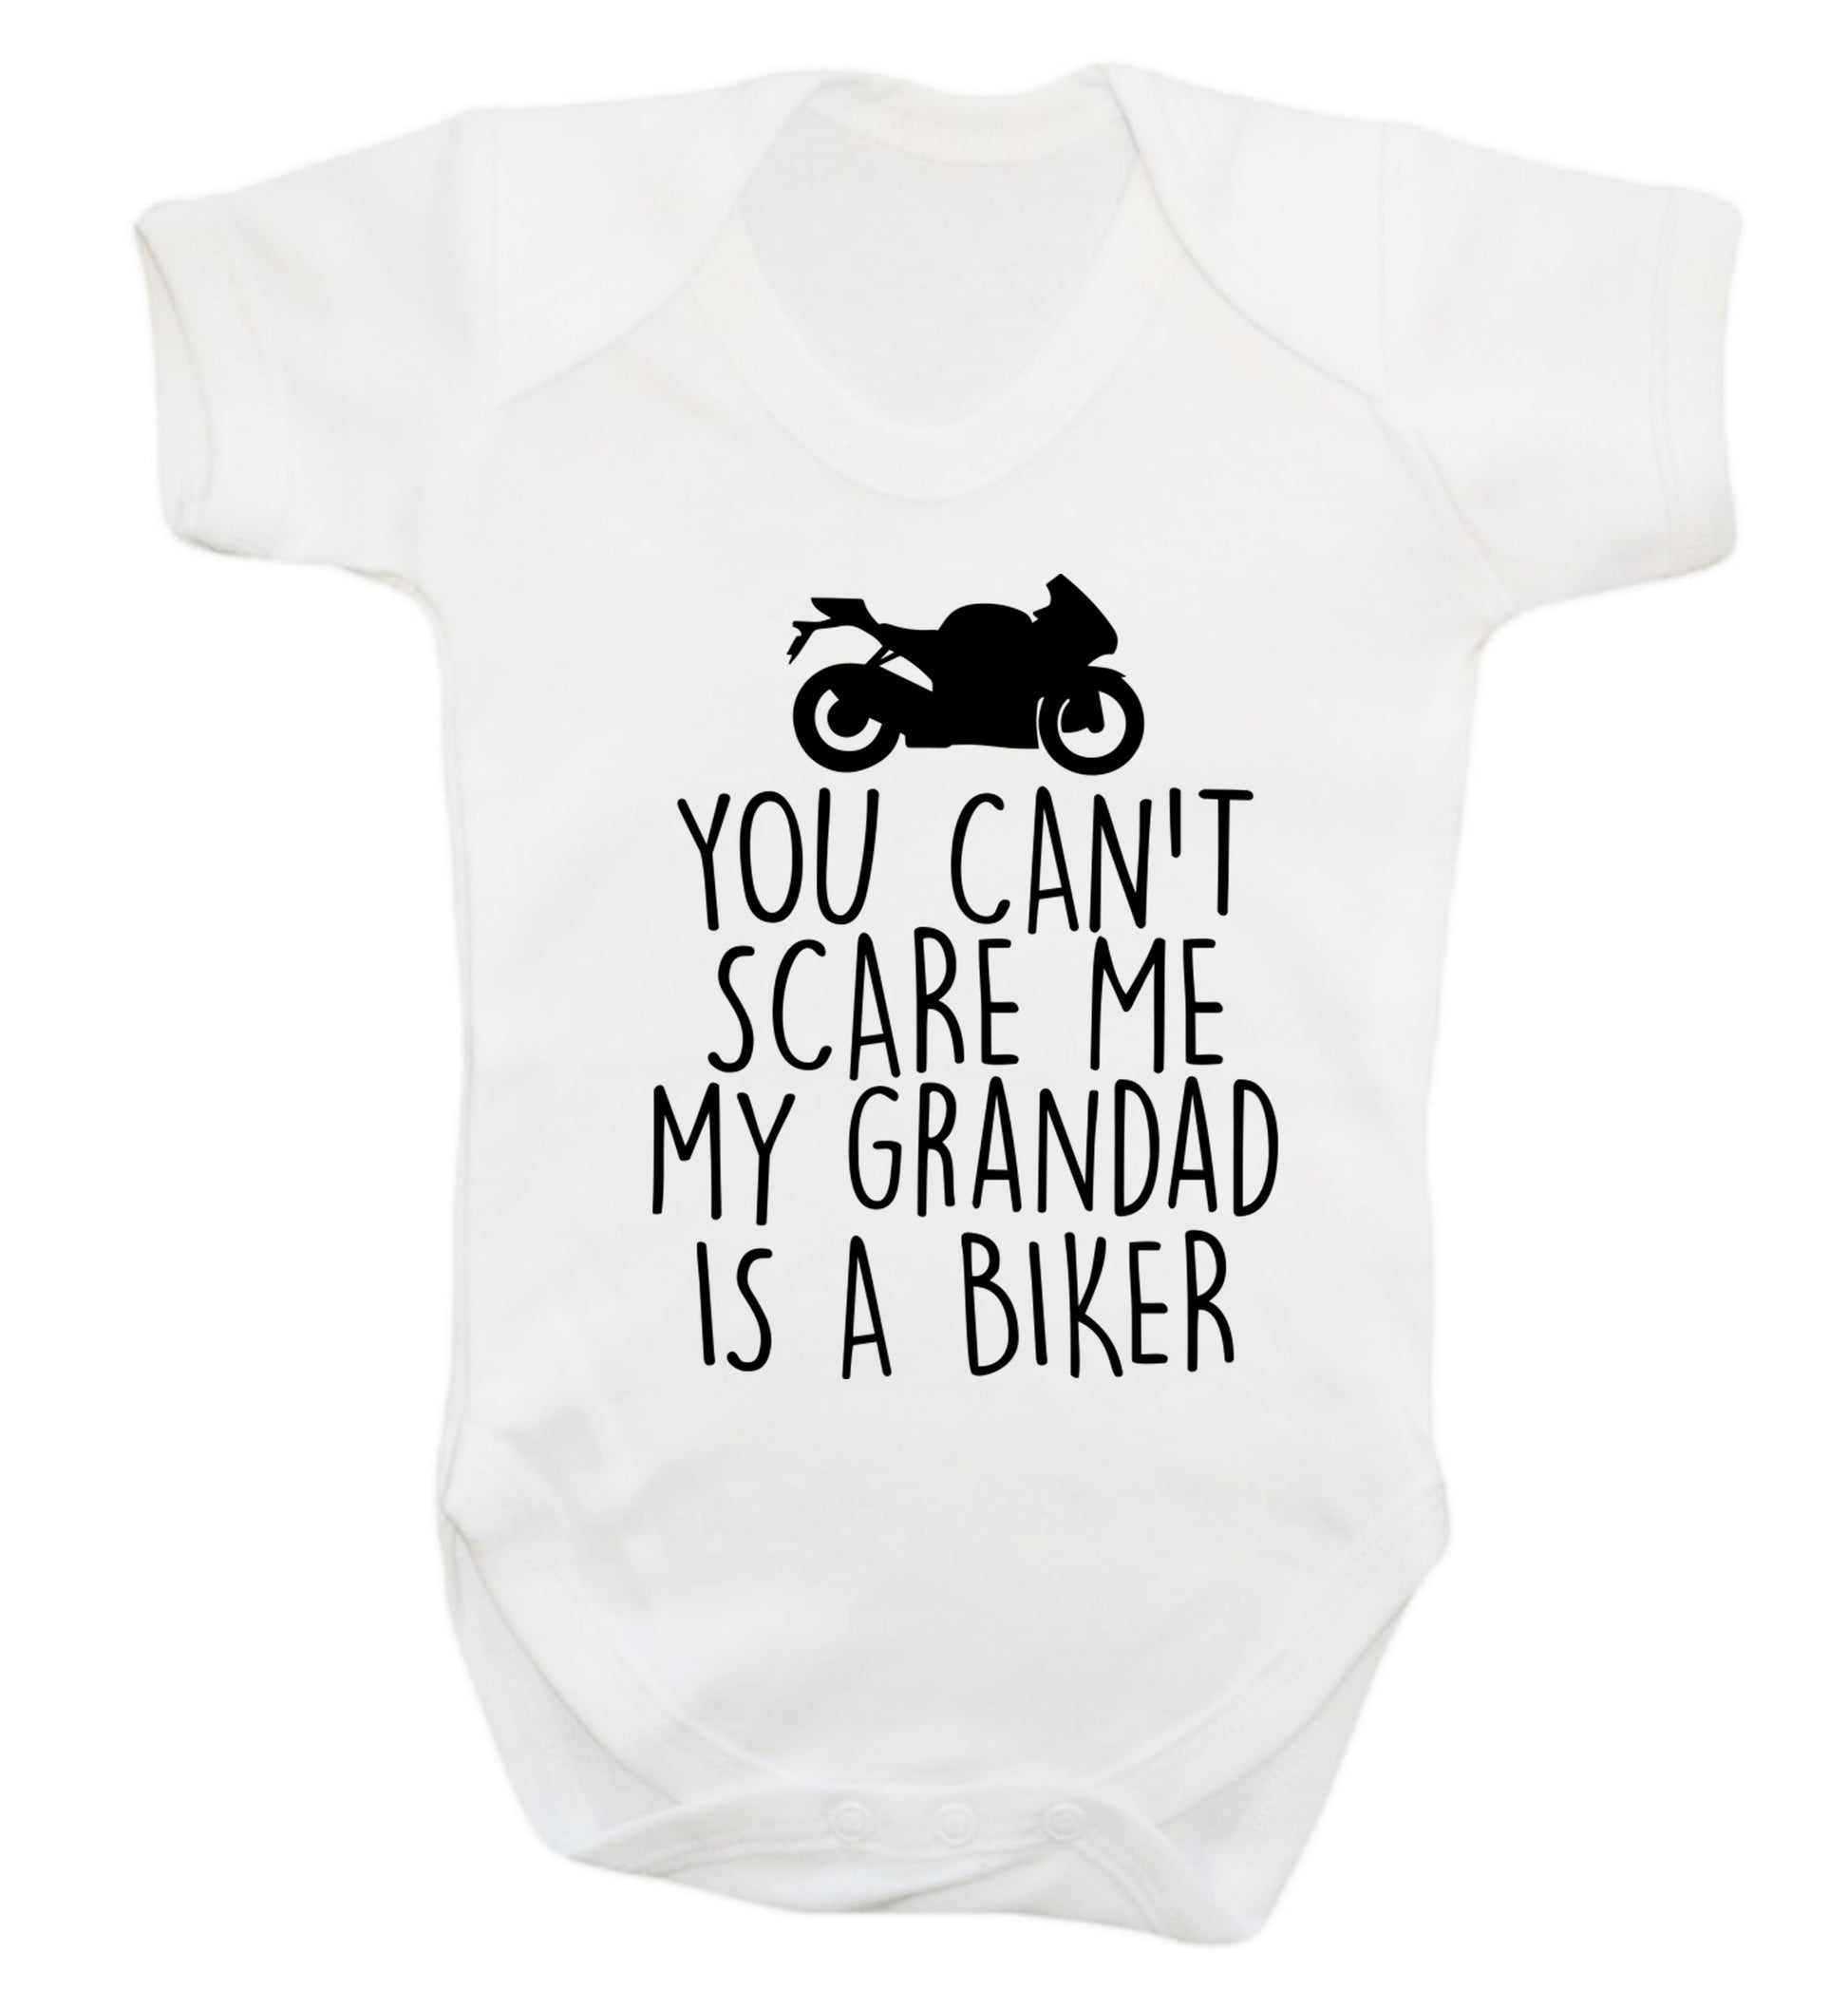 You can't scare me my grandad is a biker Baby Vest white 18-24 months